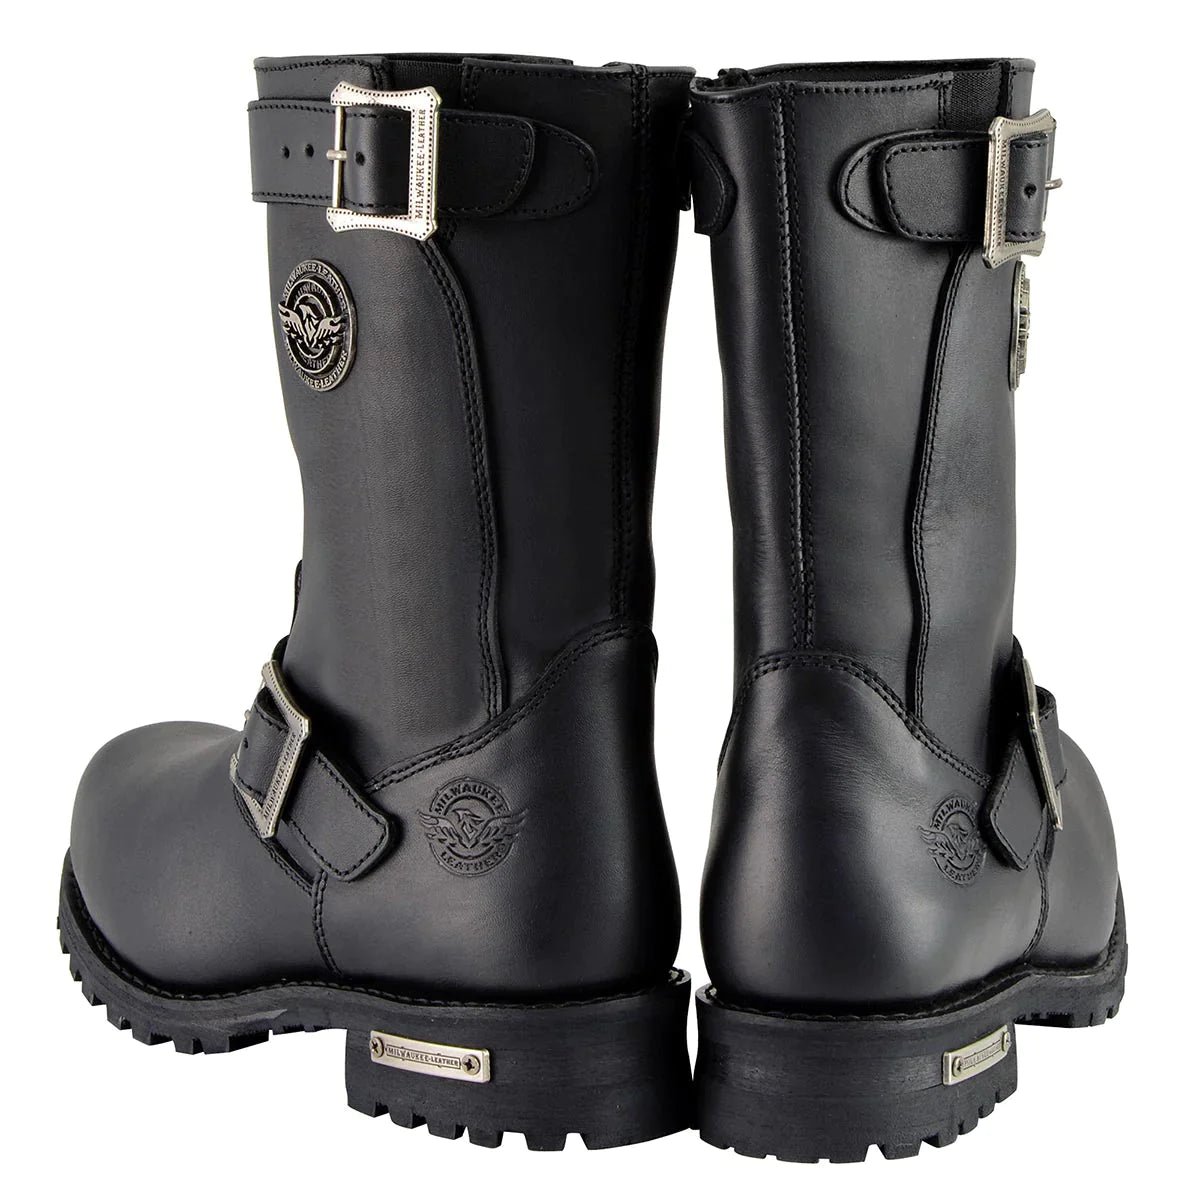 Men's Black 'Wide-Width' 11-Inch Classic Engineer Motorcycle Leather Boots